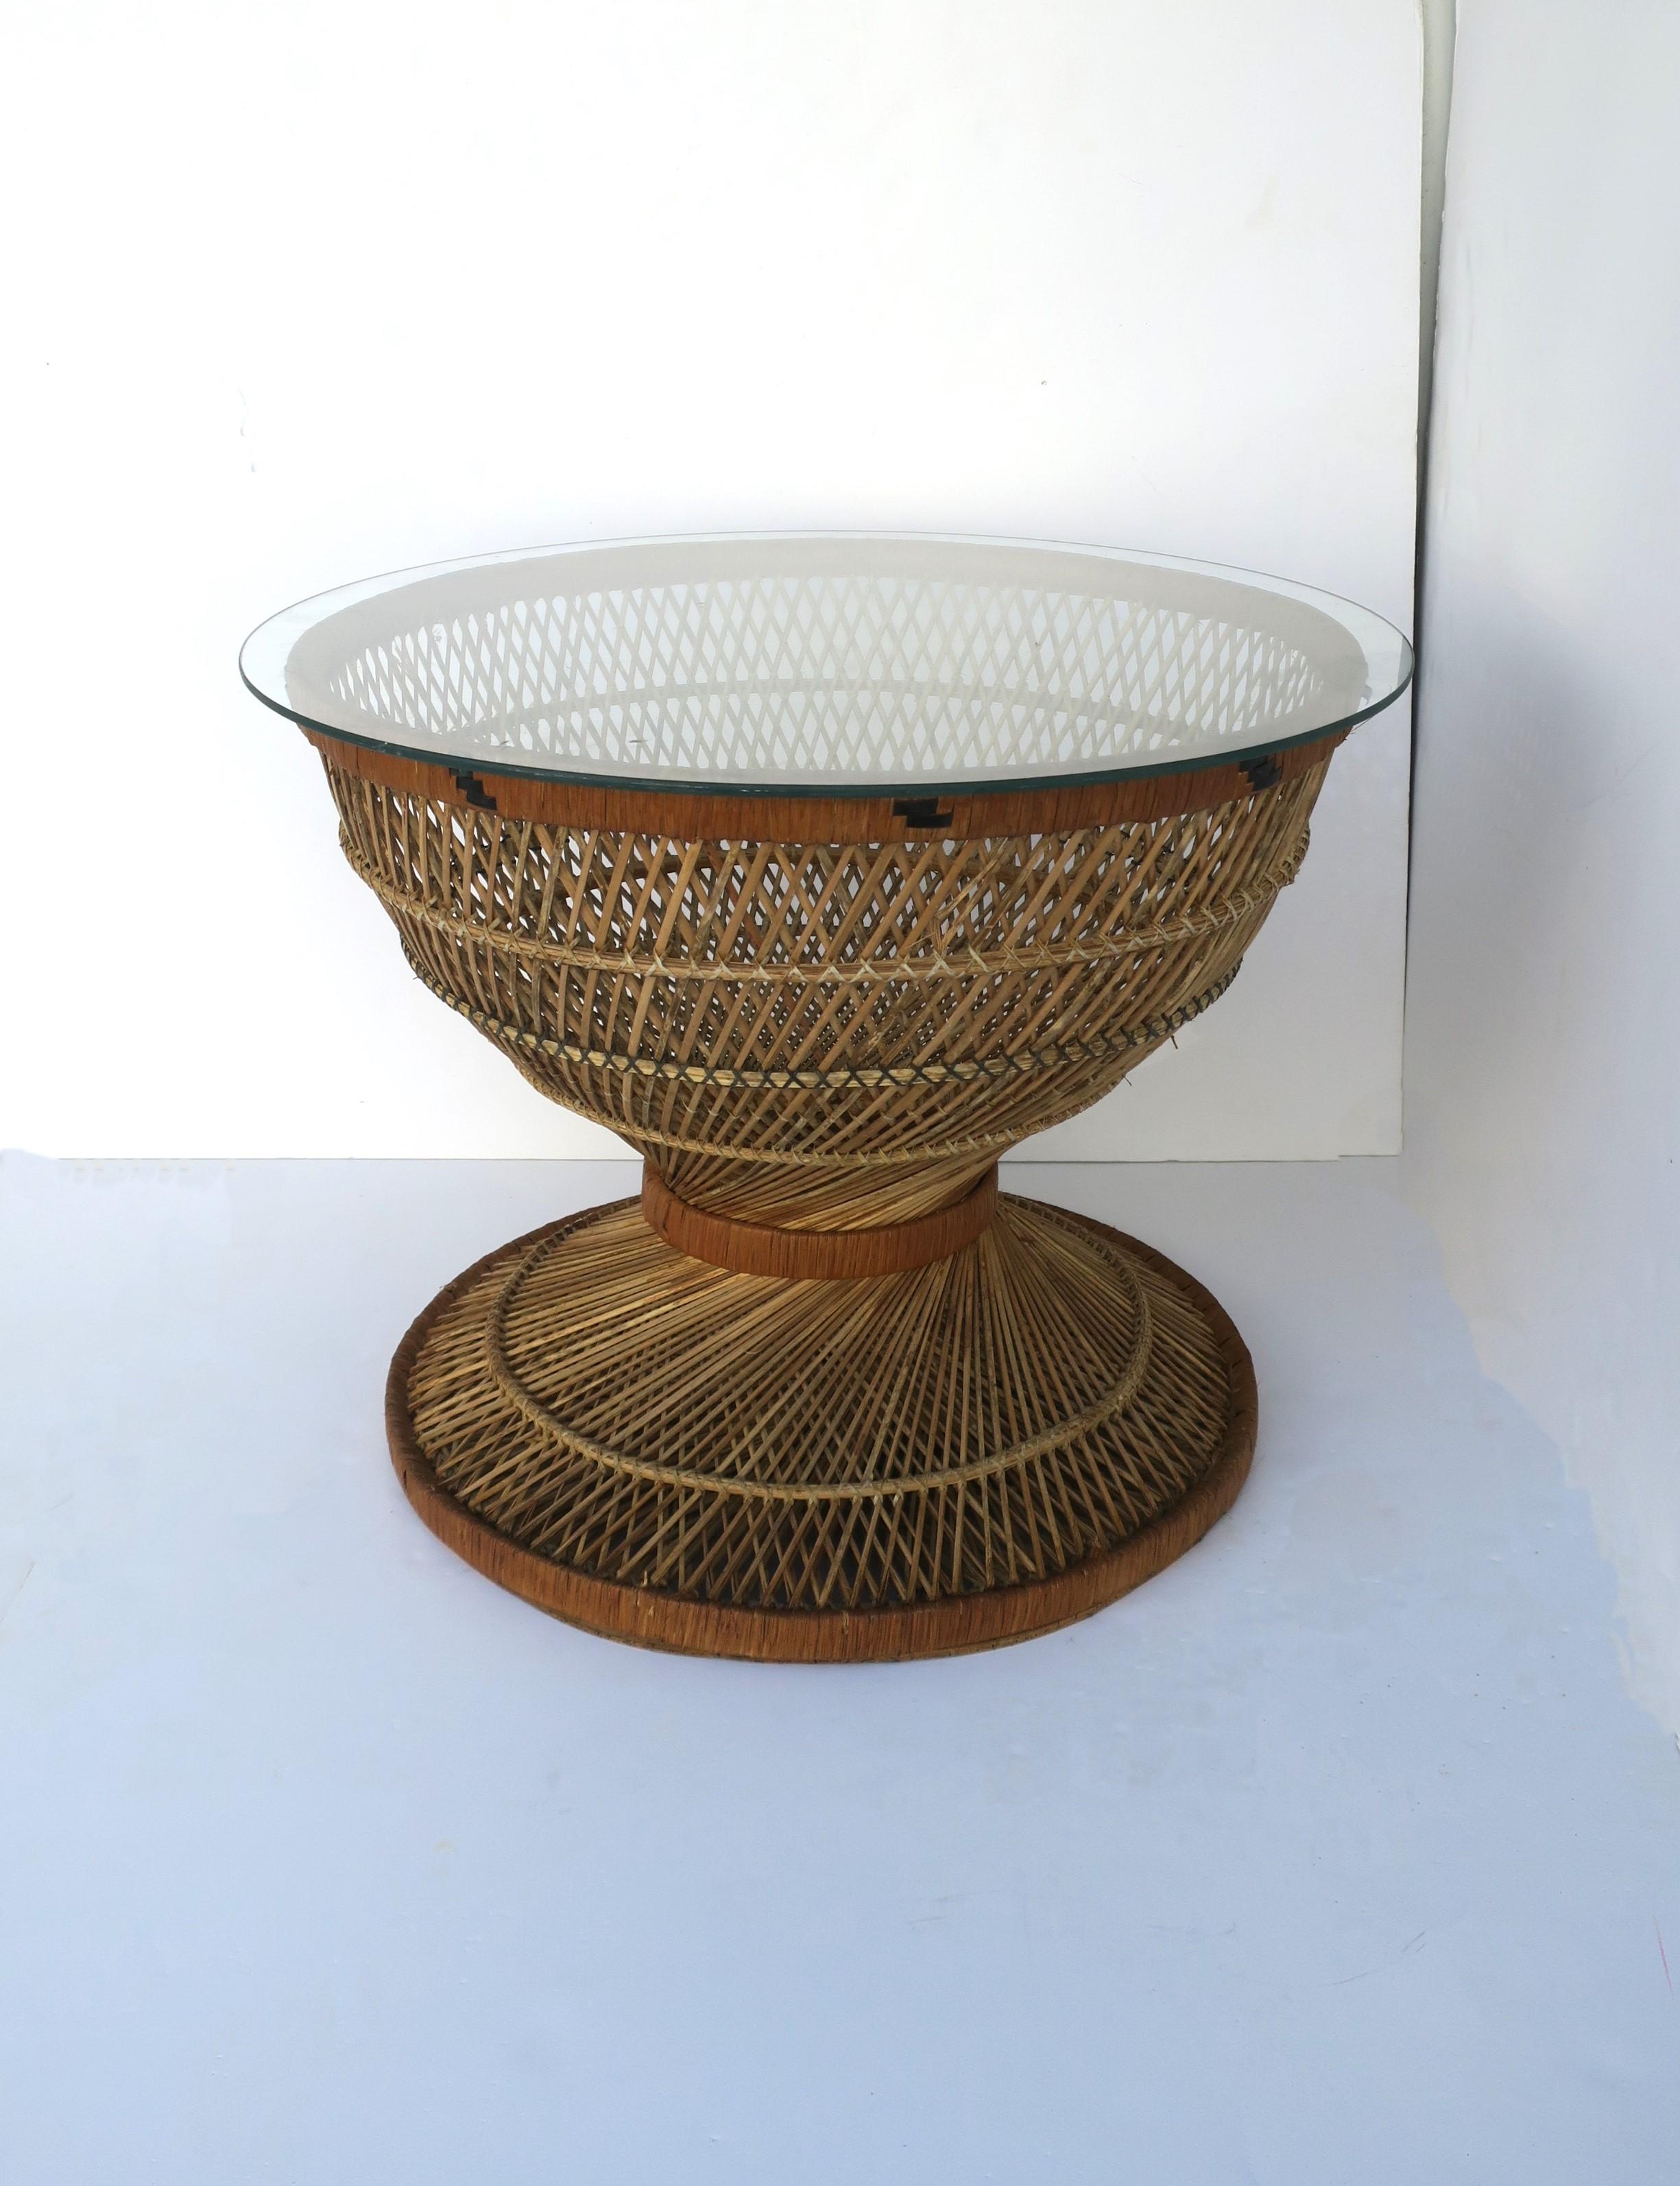 A round wicker and glass end, side or cocktail table with hourglass shape, in the style of designer Emmanuelle Peacock, Bohemian, circa mid-20th century. A round wicker cocktail table with an exaggerated hourglass shape and finished with a glass